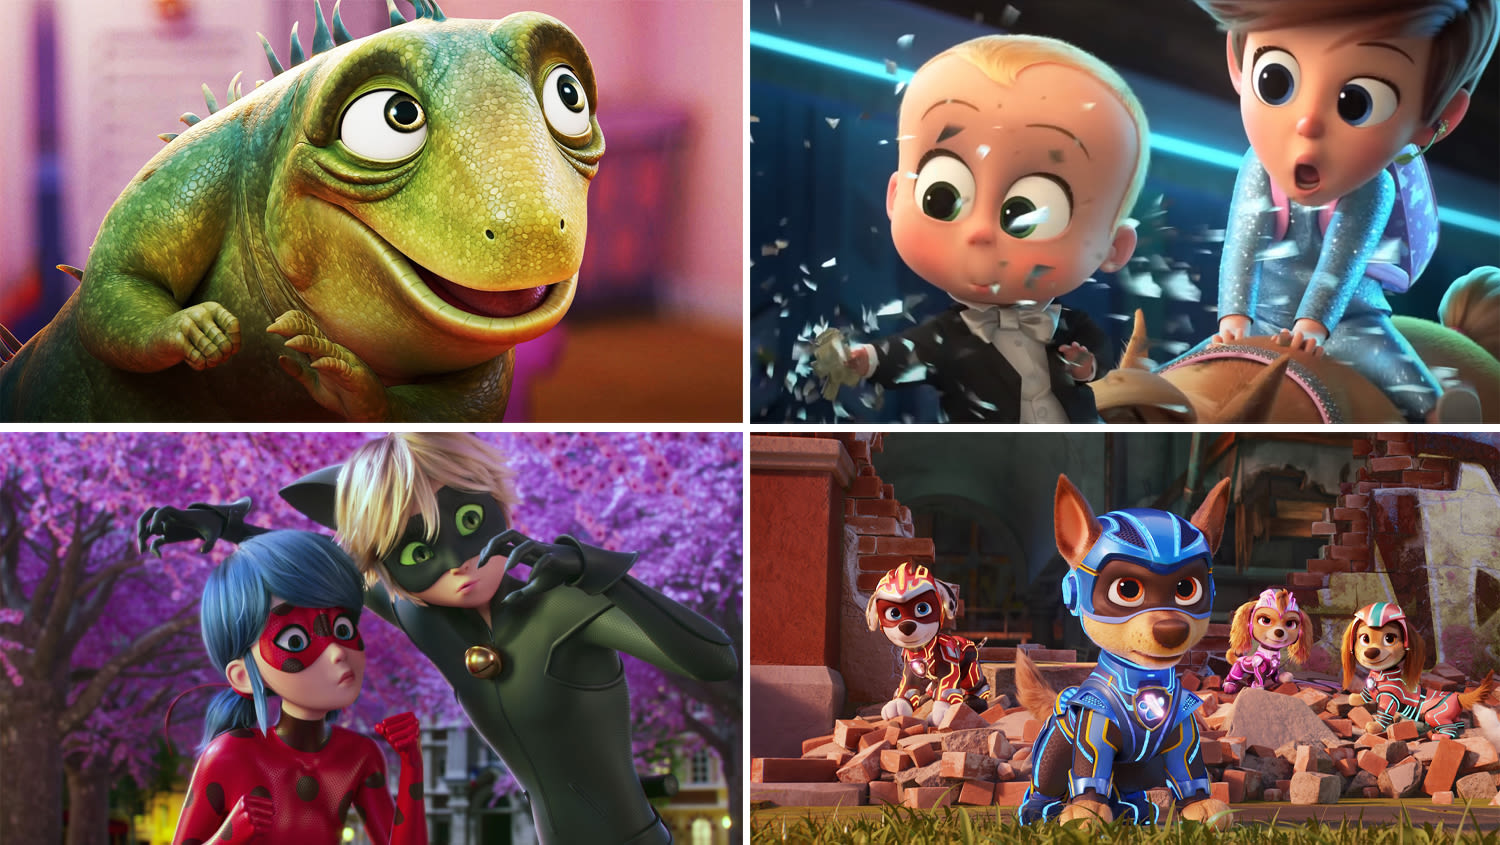 Animated Films Are 33 Of The Most Watched In Netflix’s New Data Dump: How Streamer’s Originals Stacked Up Against Licensed...